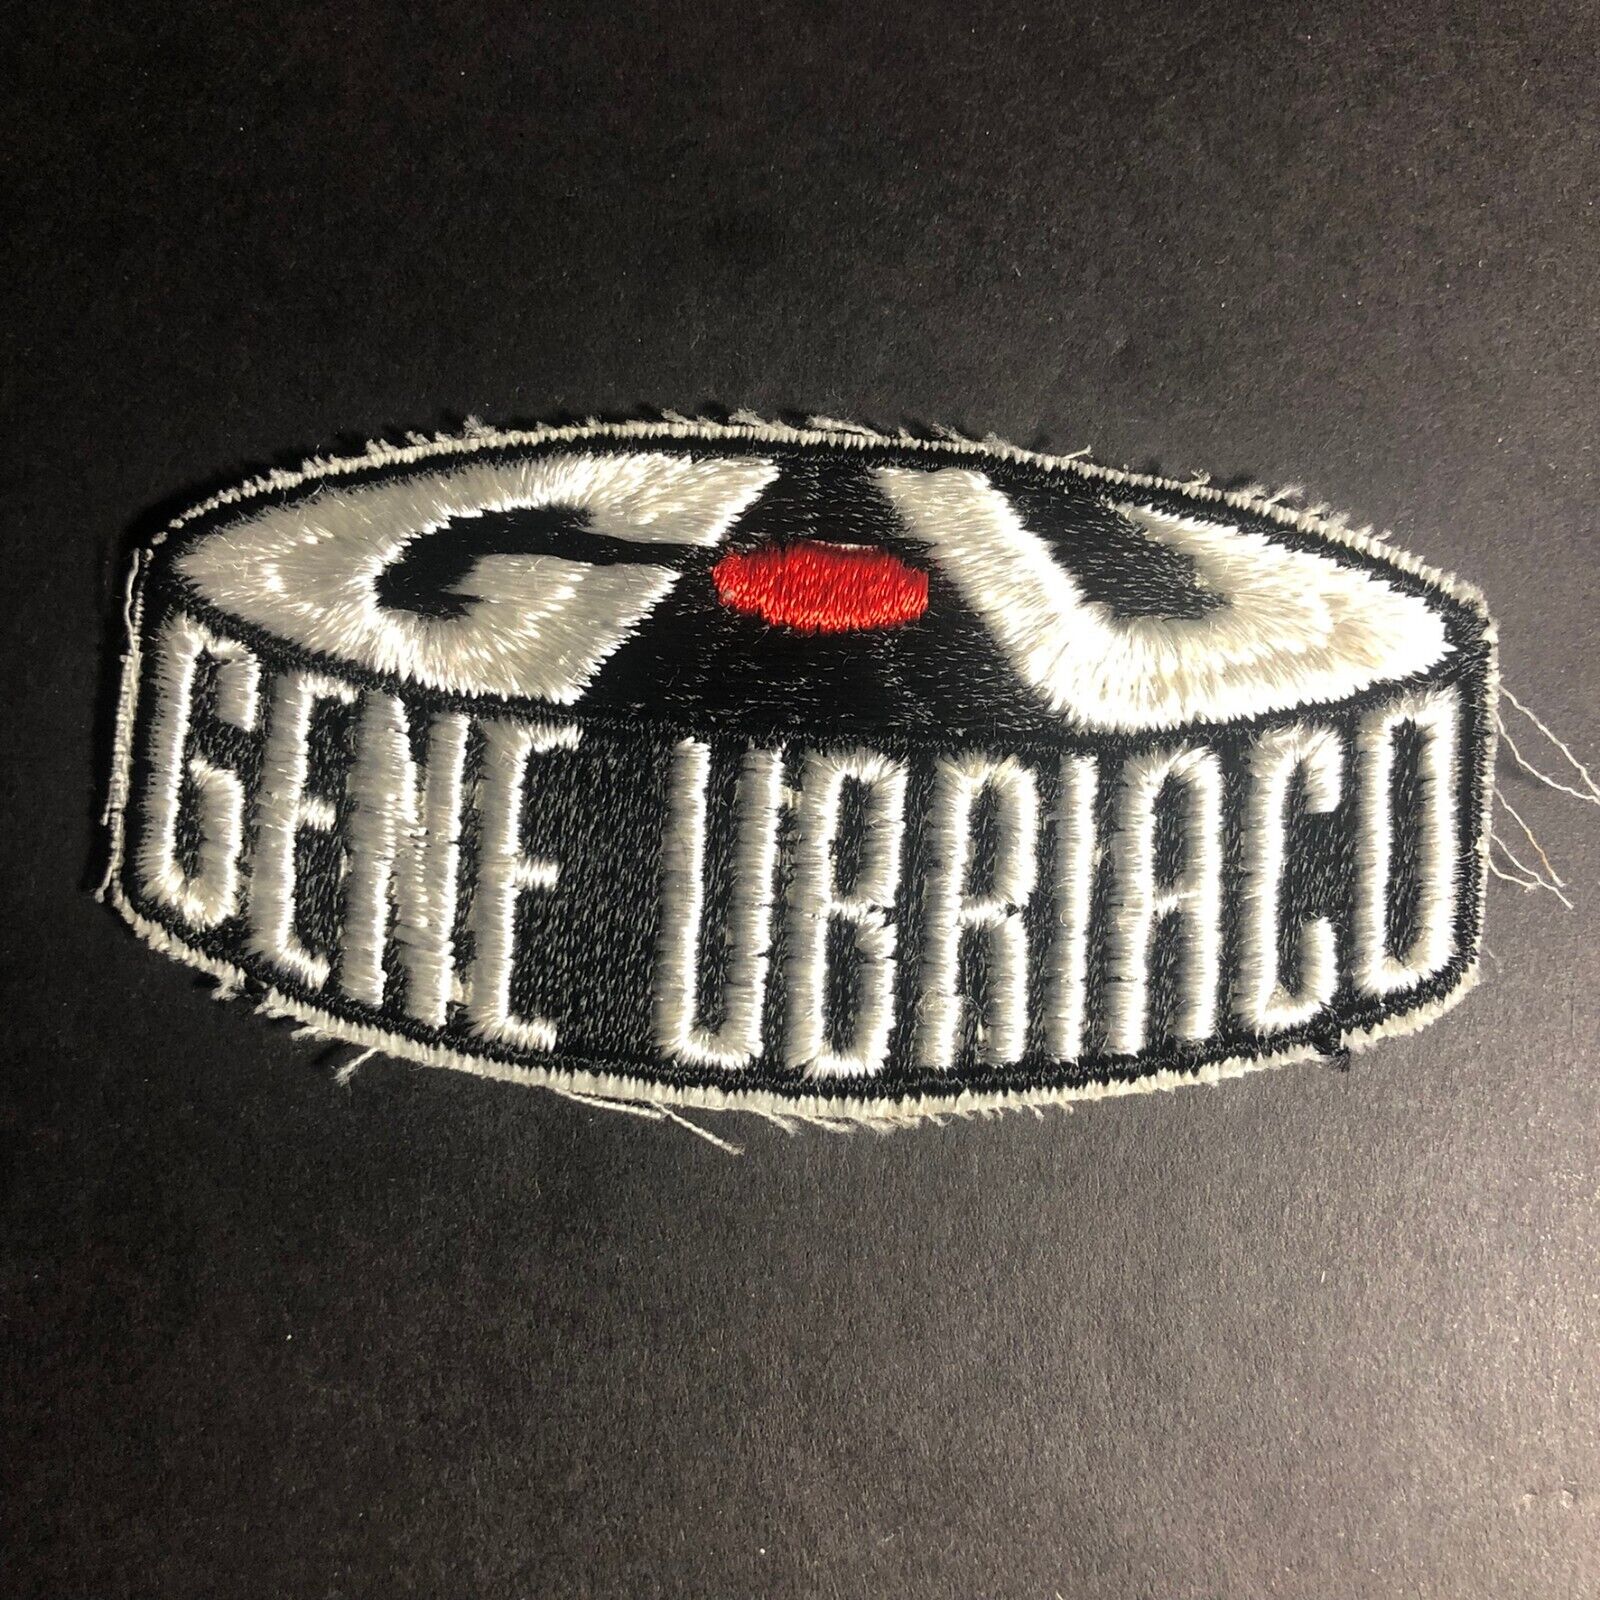 Gene Ubriaco Vintage Embroidered Patch c1960's-70's Hockey Puck